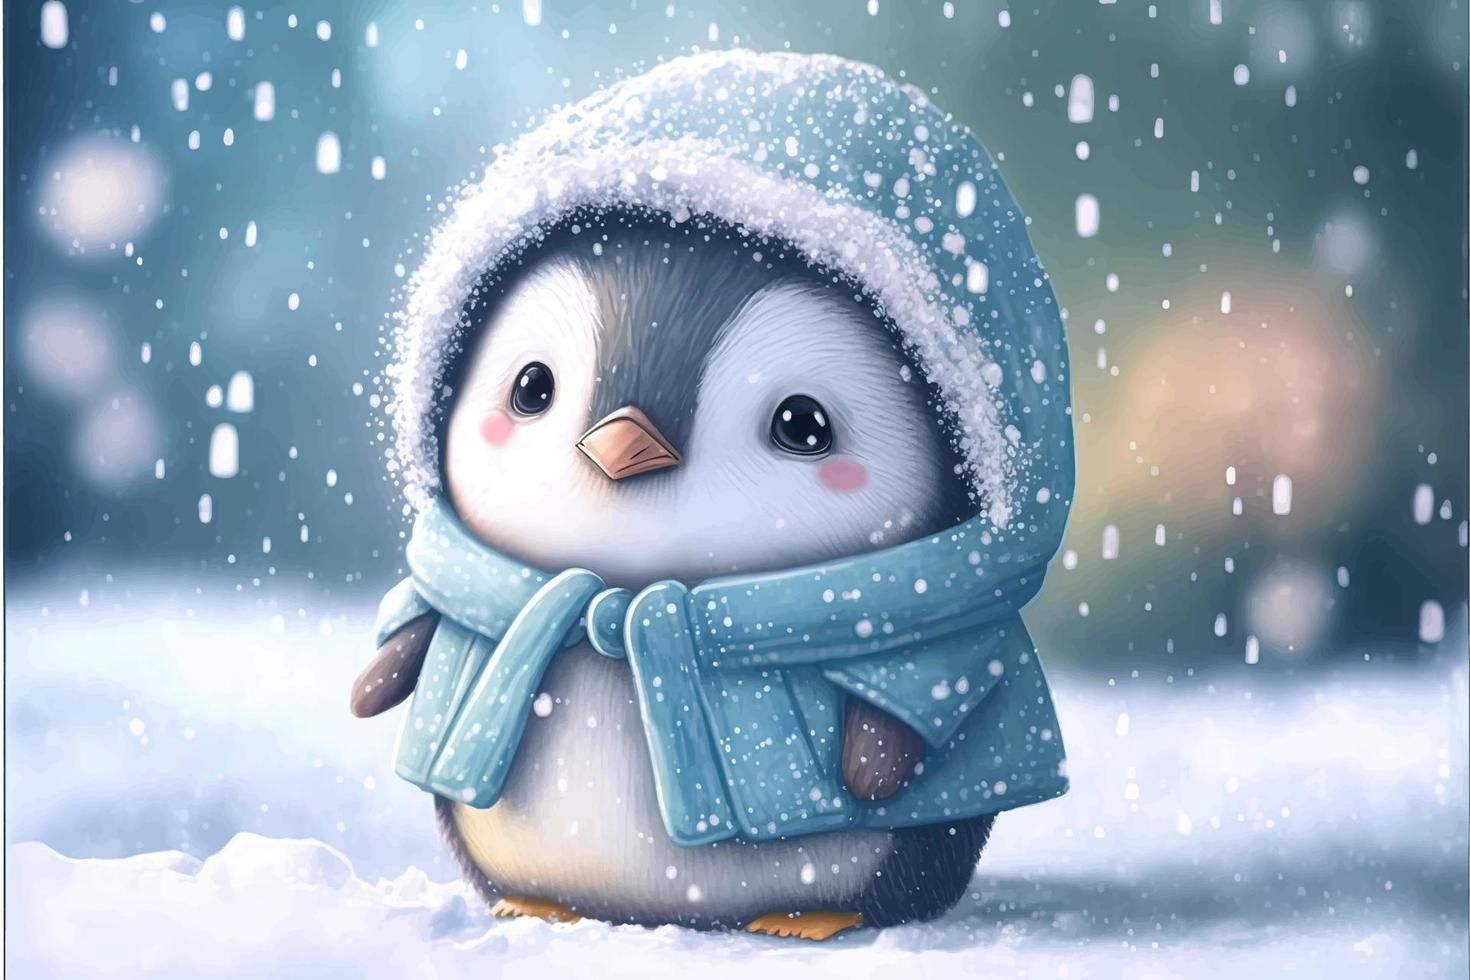 a-cute-baby-penguin-dressed-in-a-snow-coat-stands-in-the-snow-du-vector.jpg